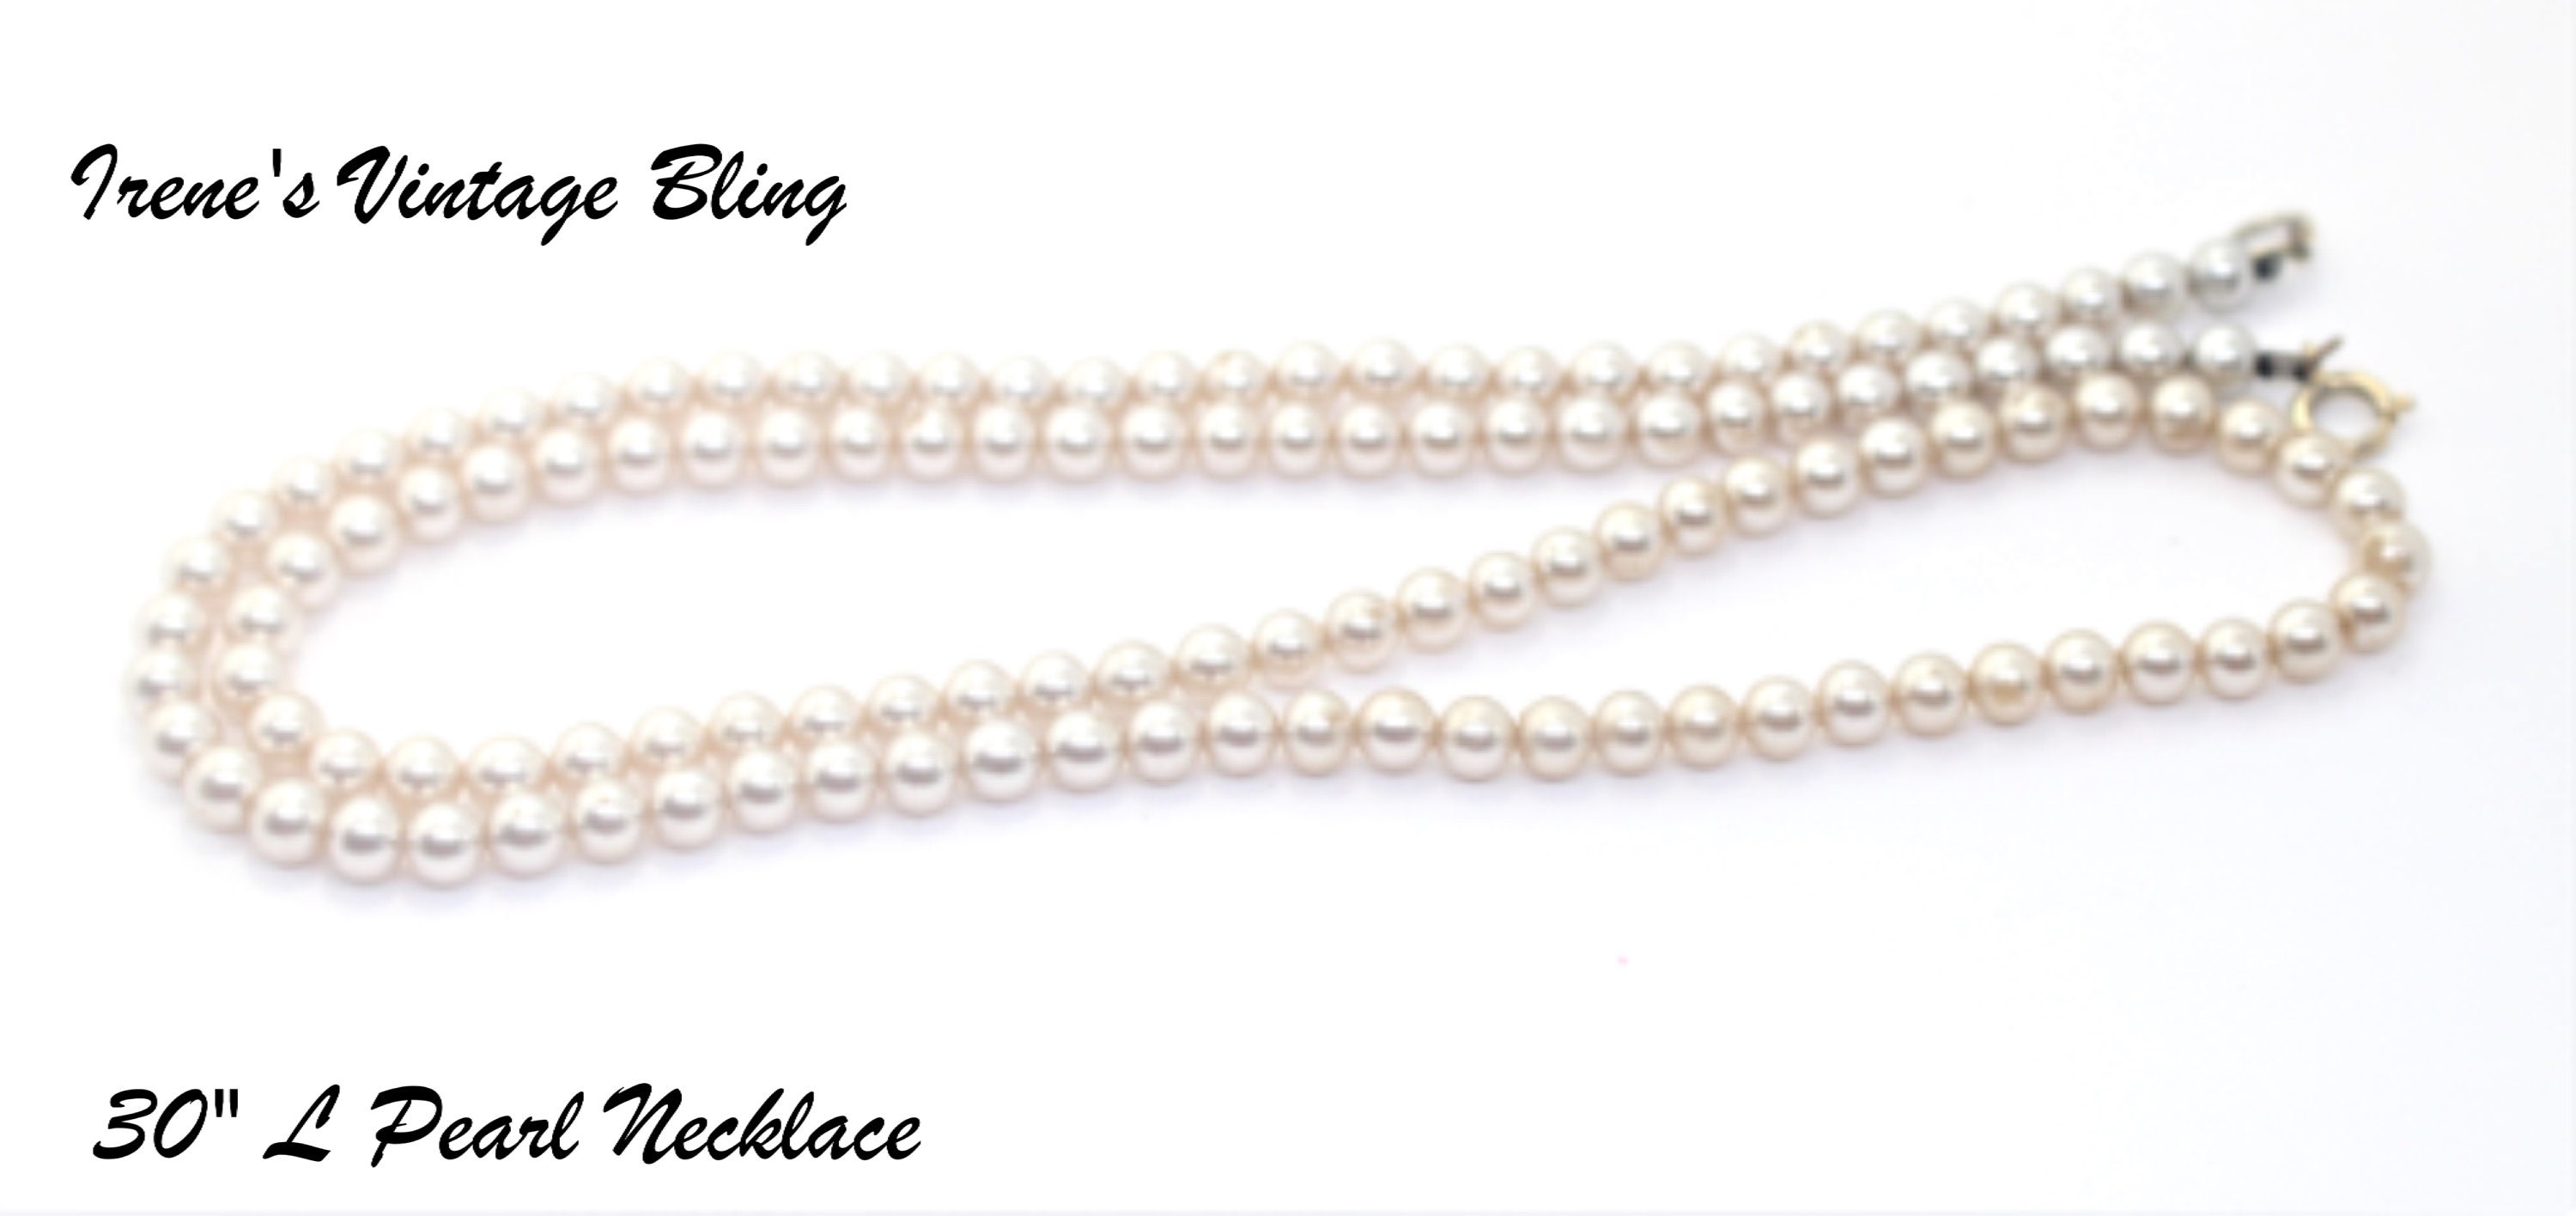 Vintage 30” Champagne Triple Twisted Pearl Necklace “Beacon Hill” - Ruby  Lane